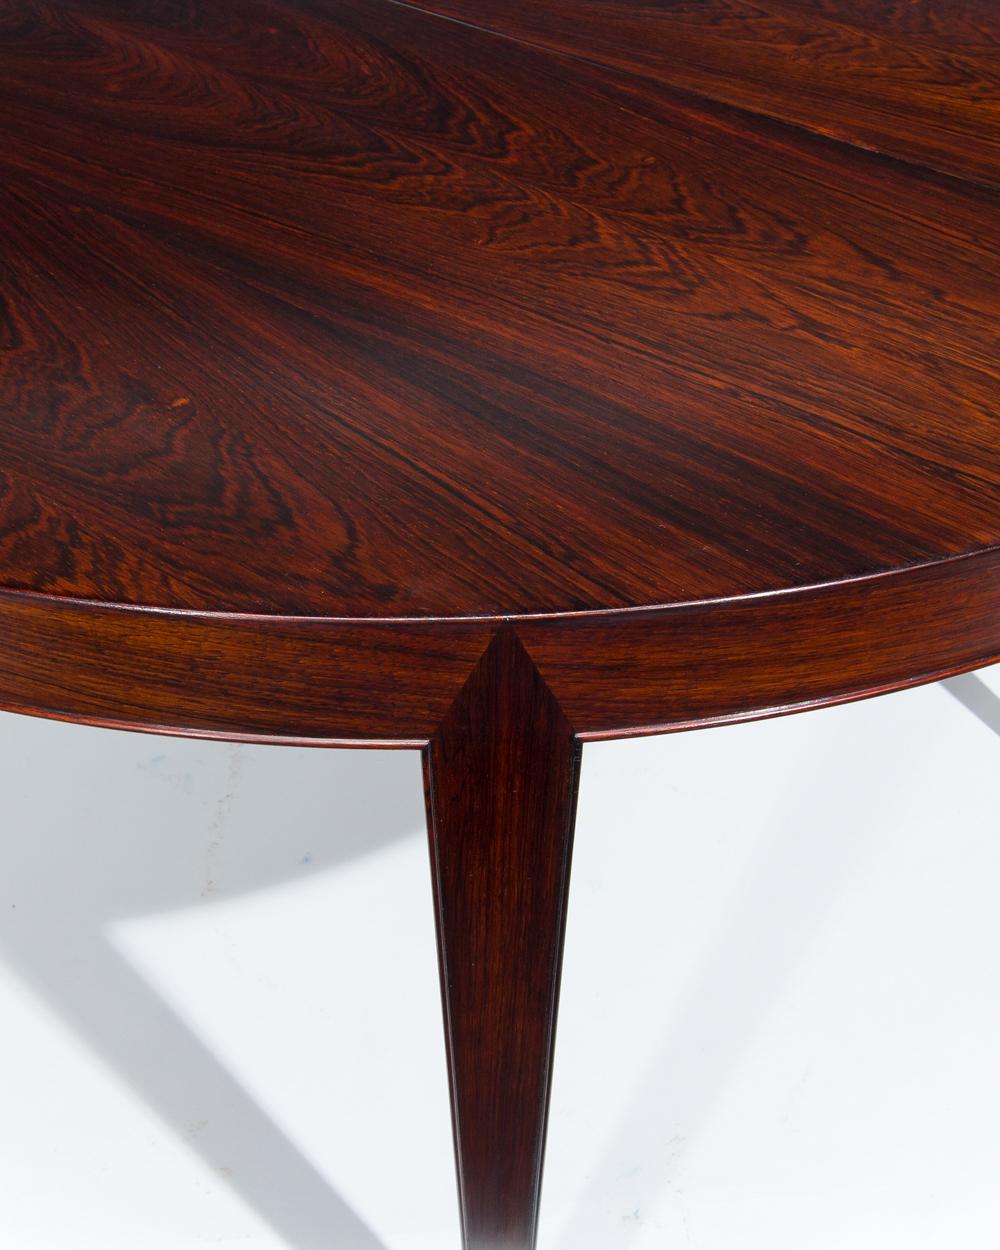 Polished Danish Rosewood Dining Table by Severin Hansen, Midcentury Design, 1960s For Sale